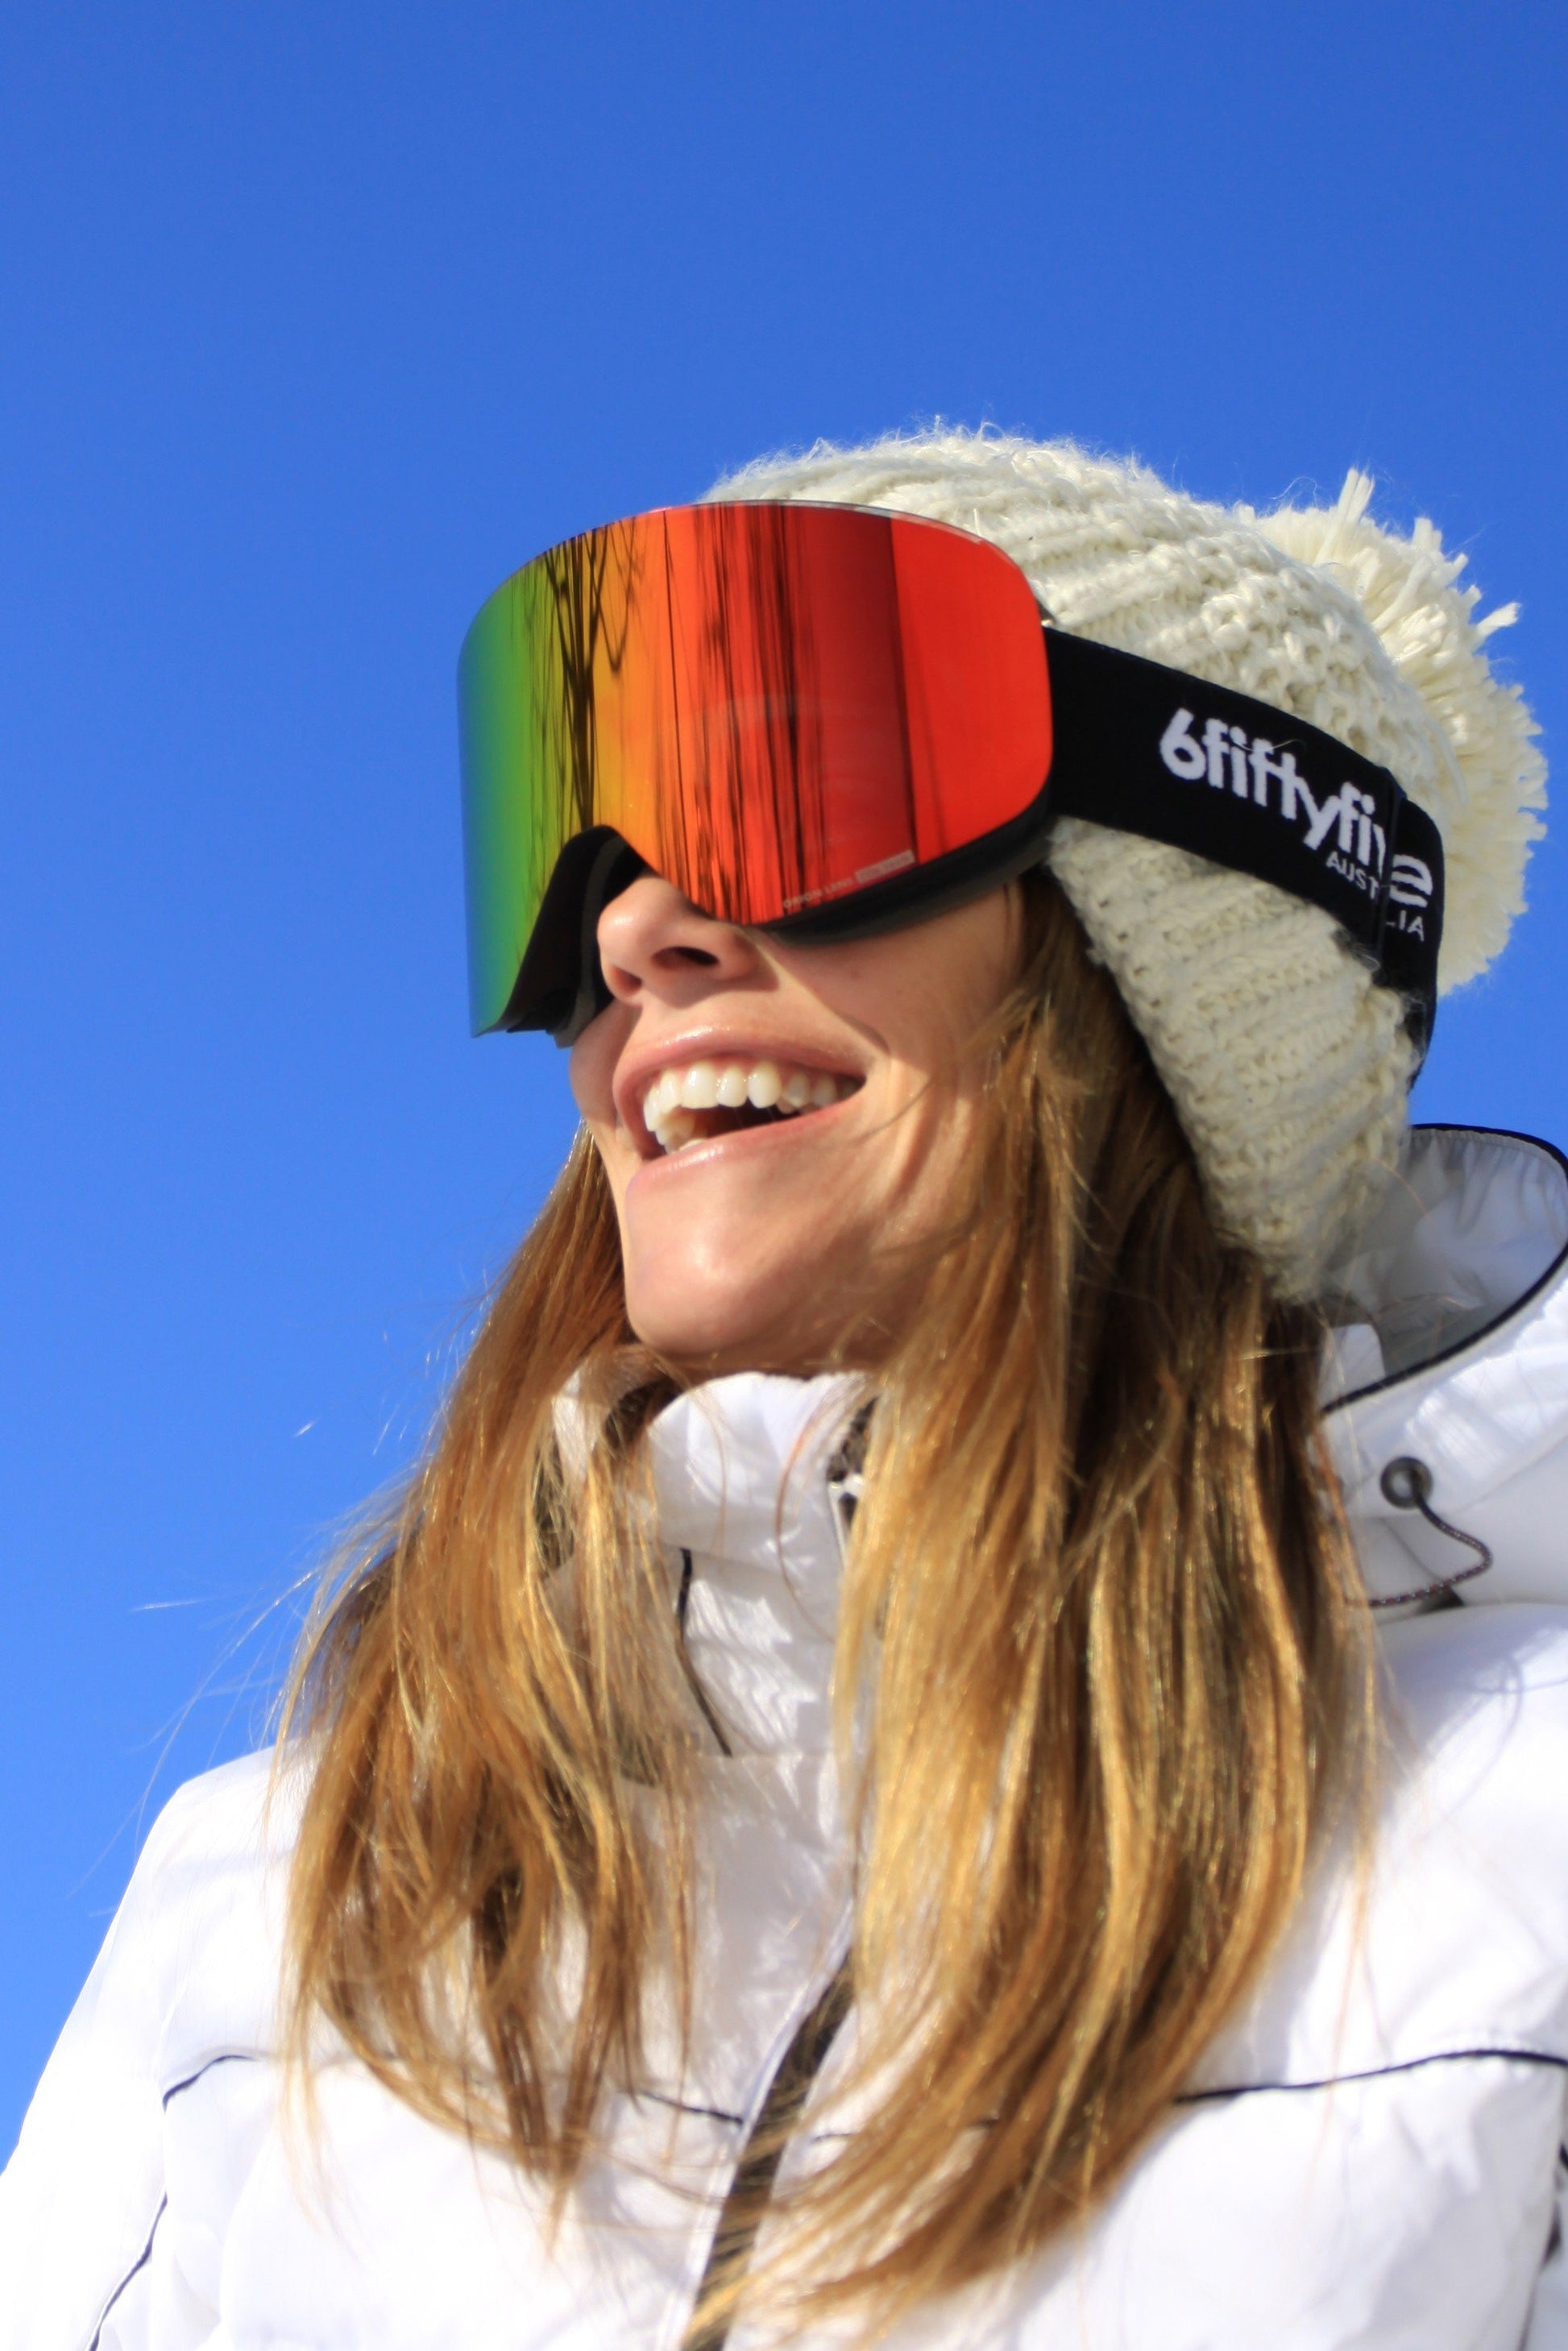 6fiftyfive | 6fiftyfive frameless ski goggles for men and women - multilayer, magnetic, full REVO - Red.